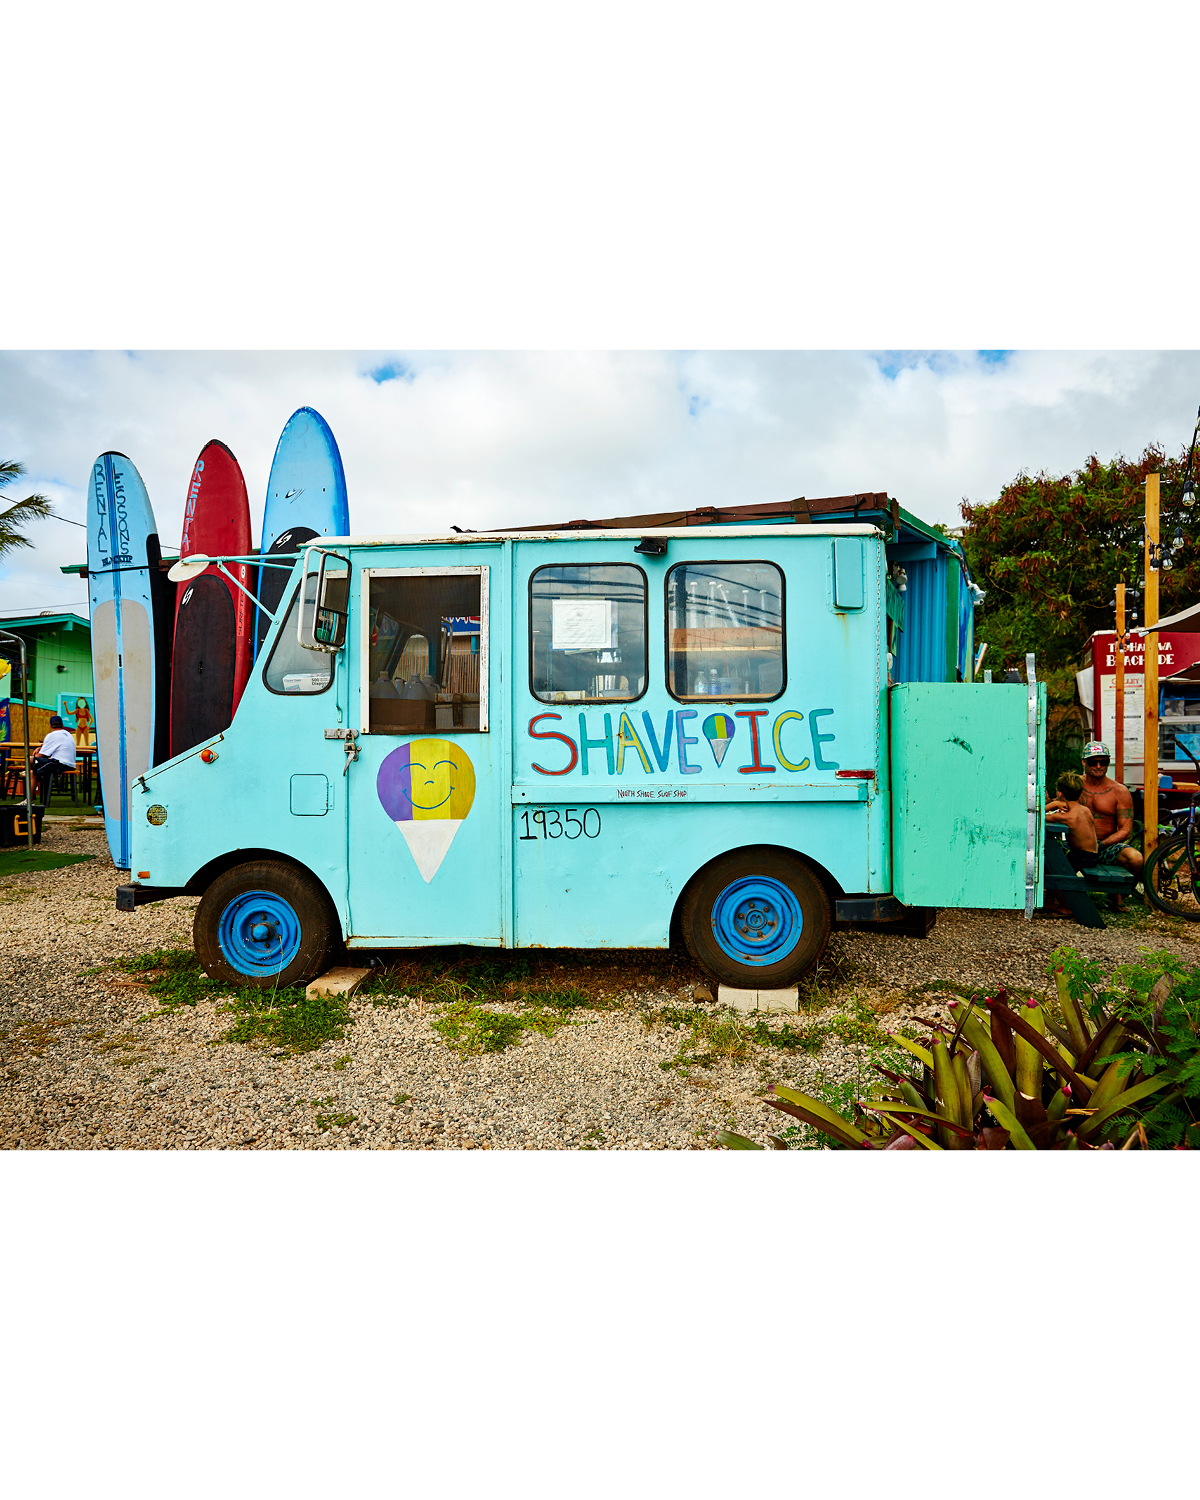  SHARKS COVE SHAVE ICE TRUCK 